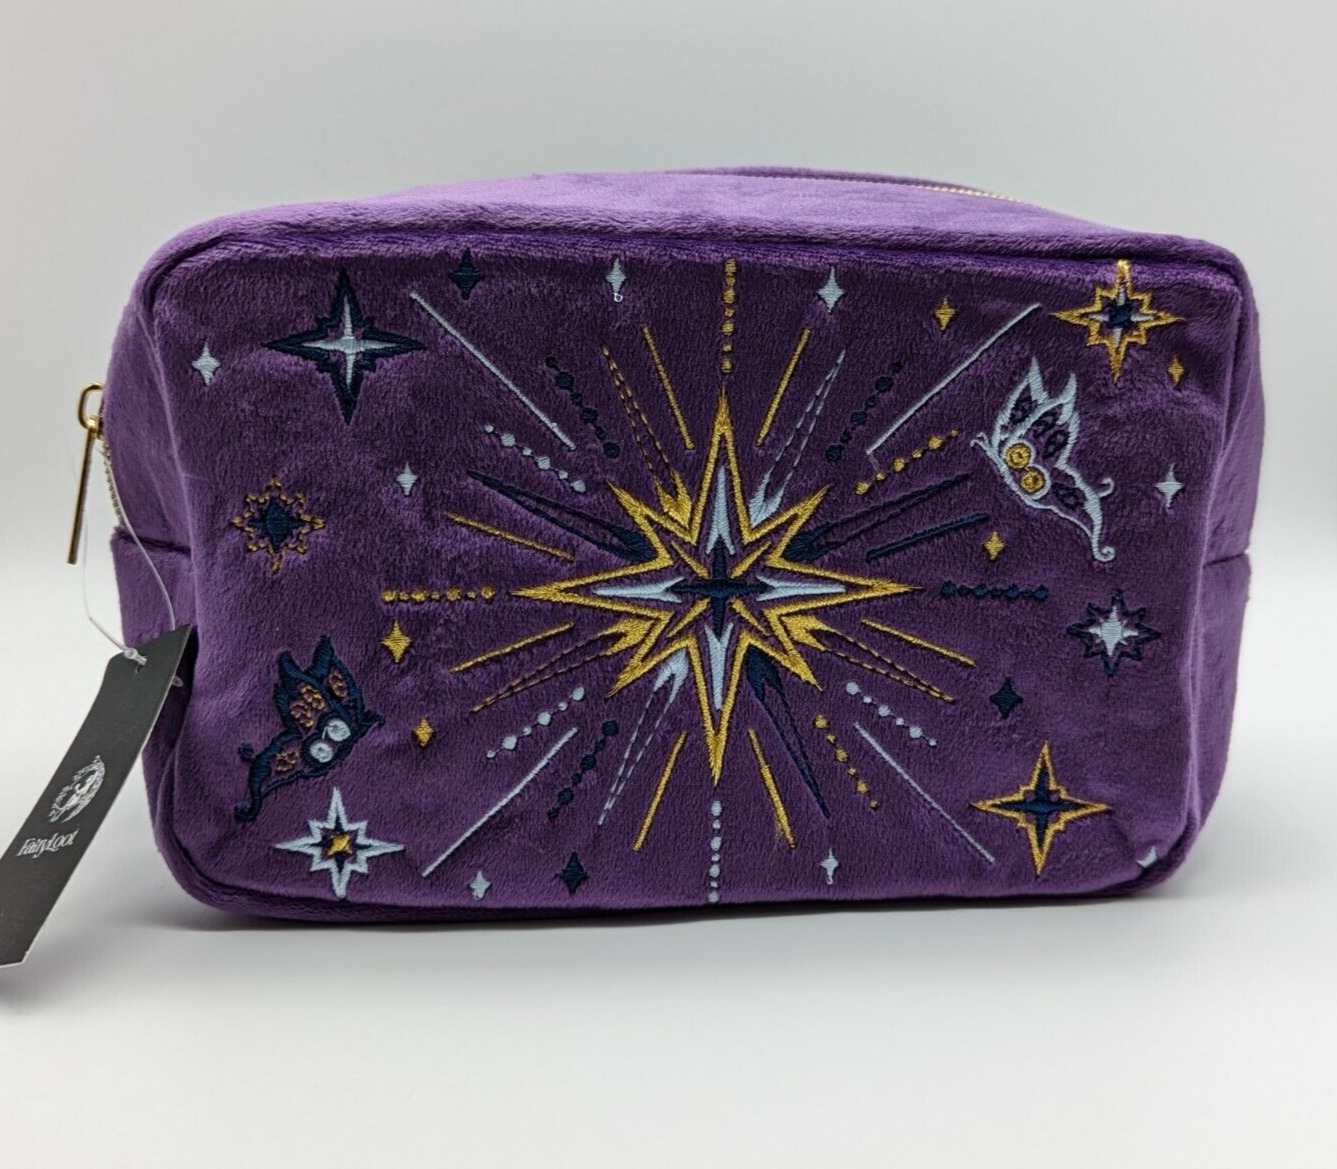 Fairyloot Exclusive Darker By Four Inspired Purple Embroidered Bag June CL Tan